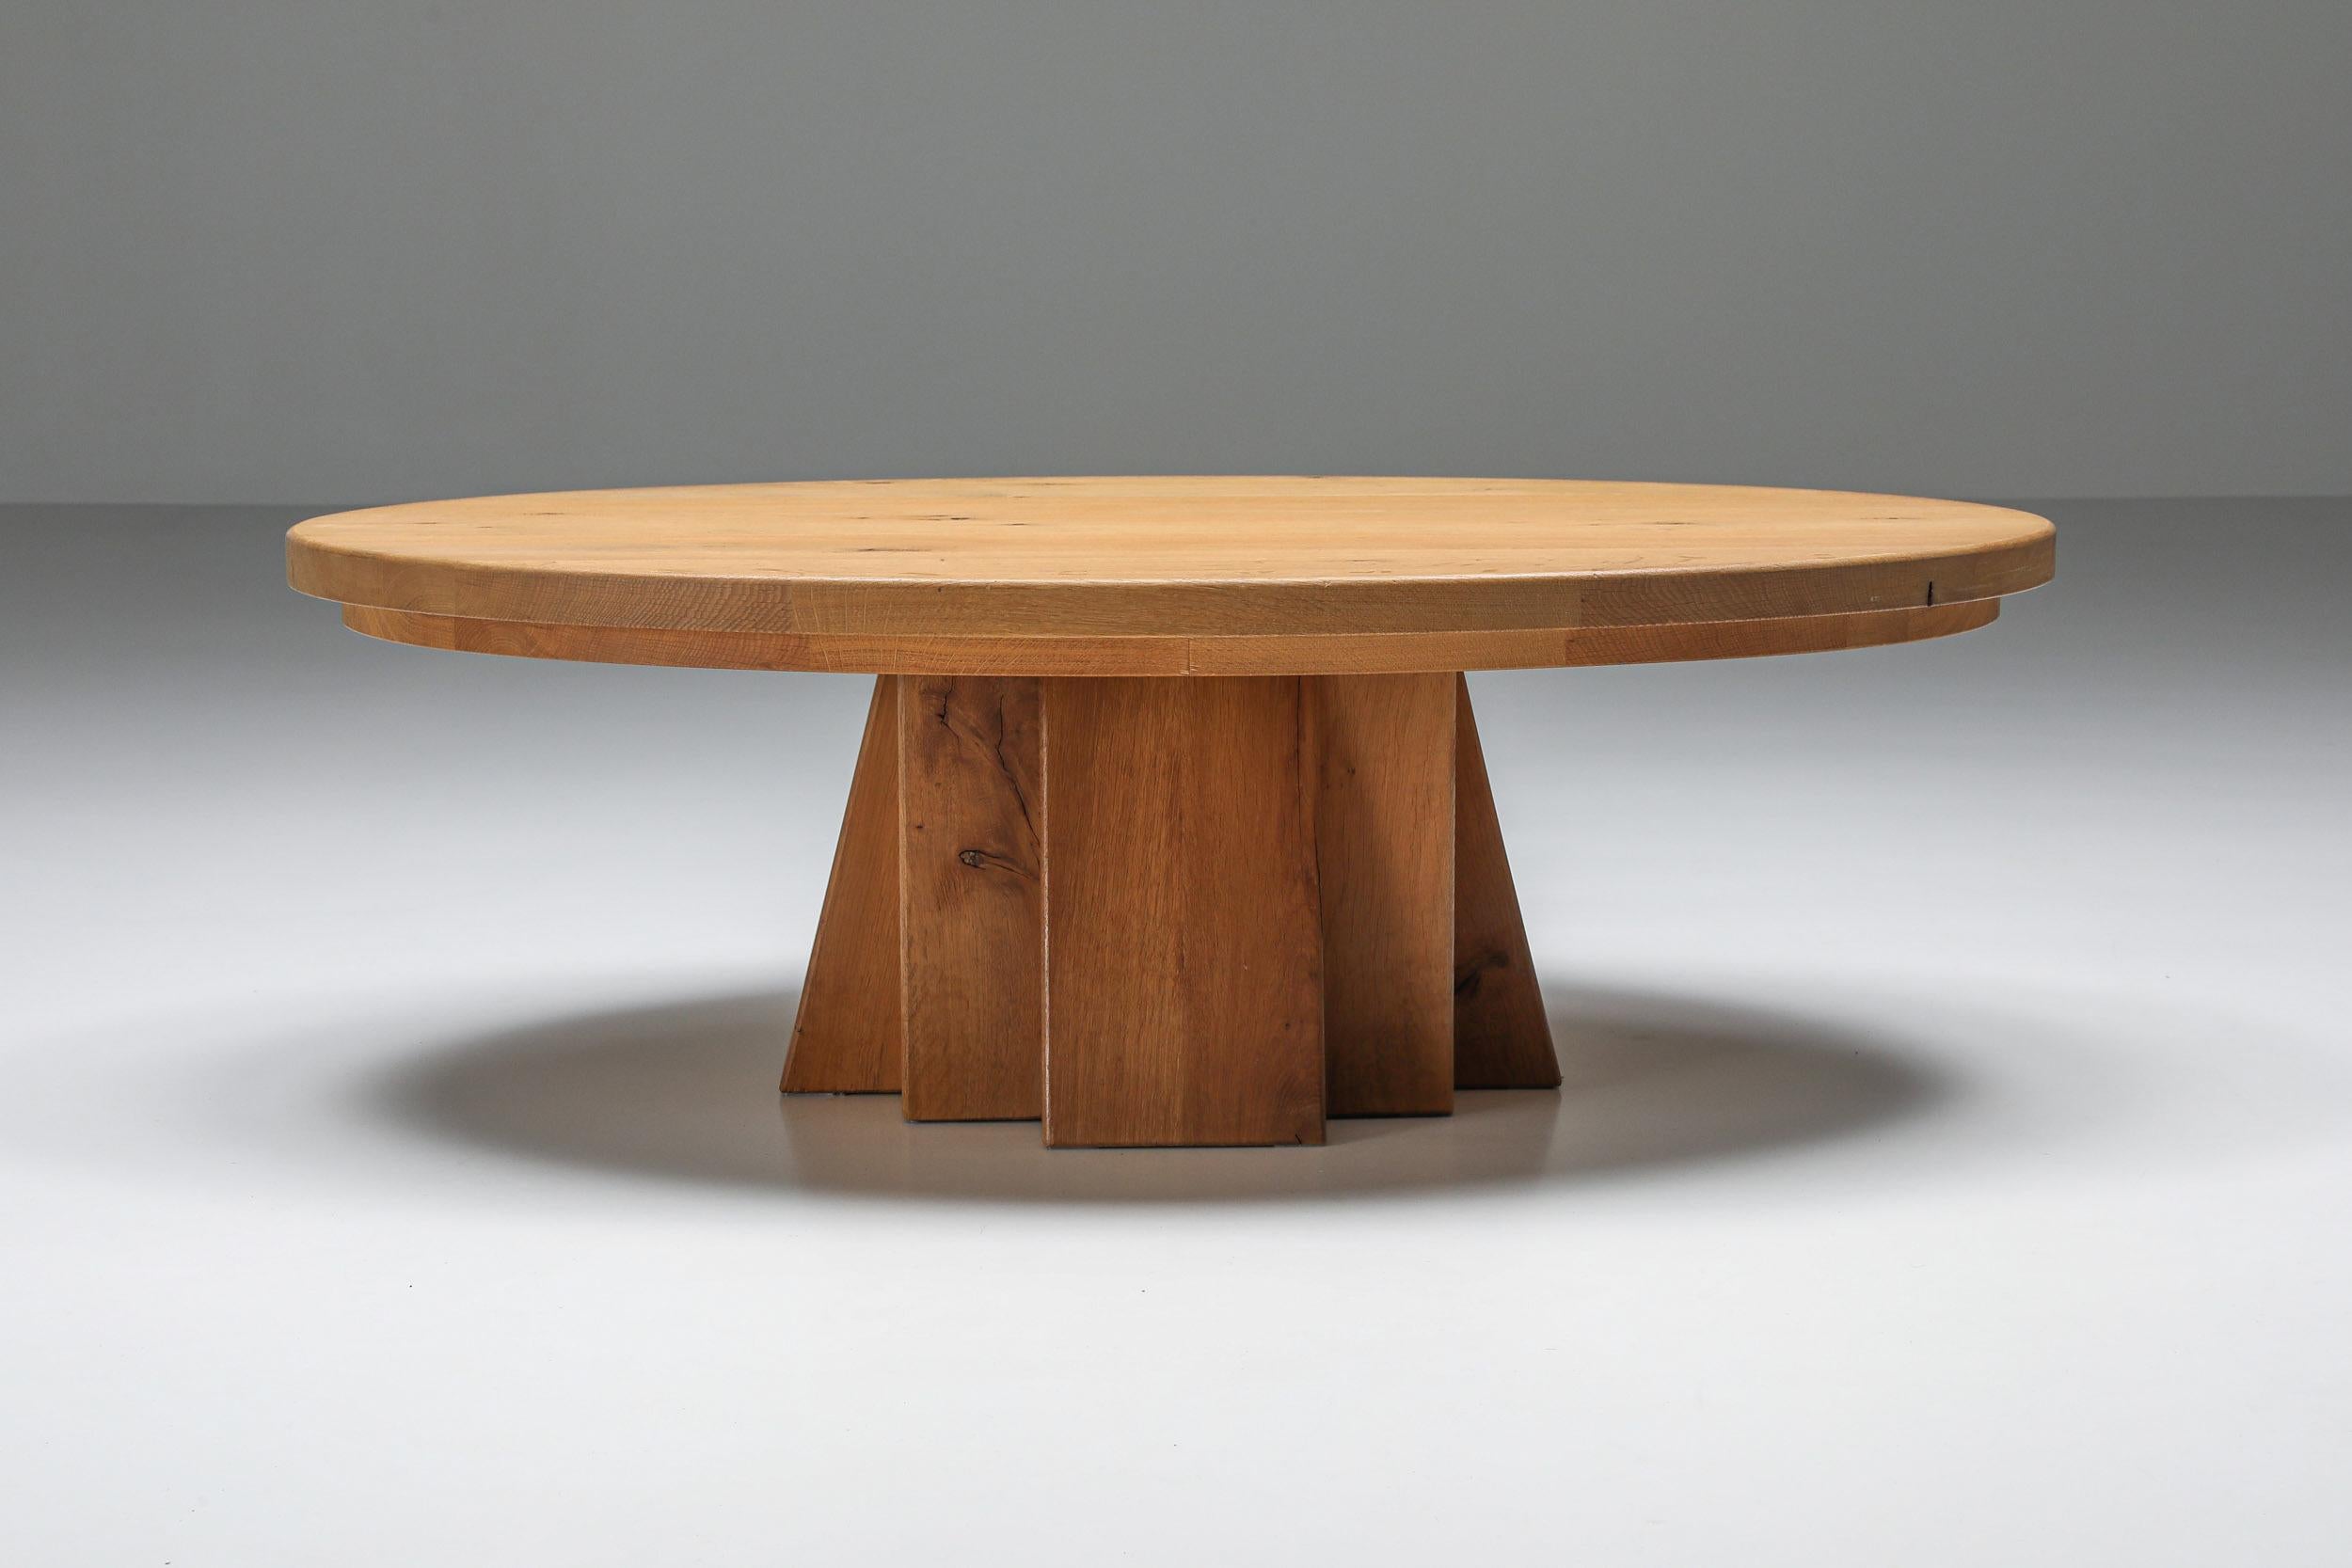 Coffee table; Salon table; Wooden side table; Minimalist; Rustic; Axel Vervoordt

Axel Vervoordt style coffee table with a rustic twist. The legs of this table are made of layered pieces of wood, the touch of a craftsman. Would fit well in a